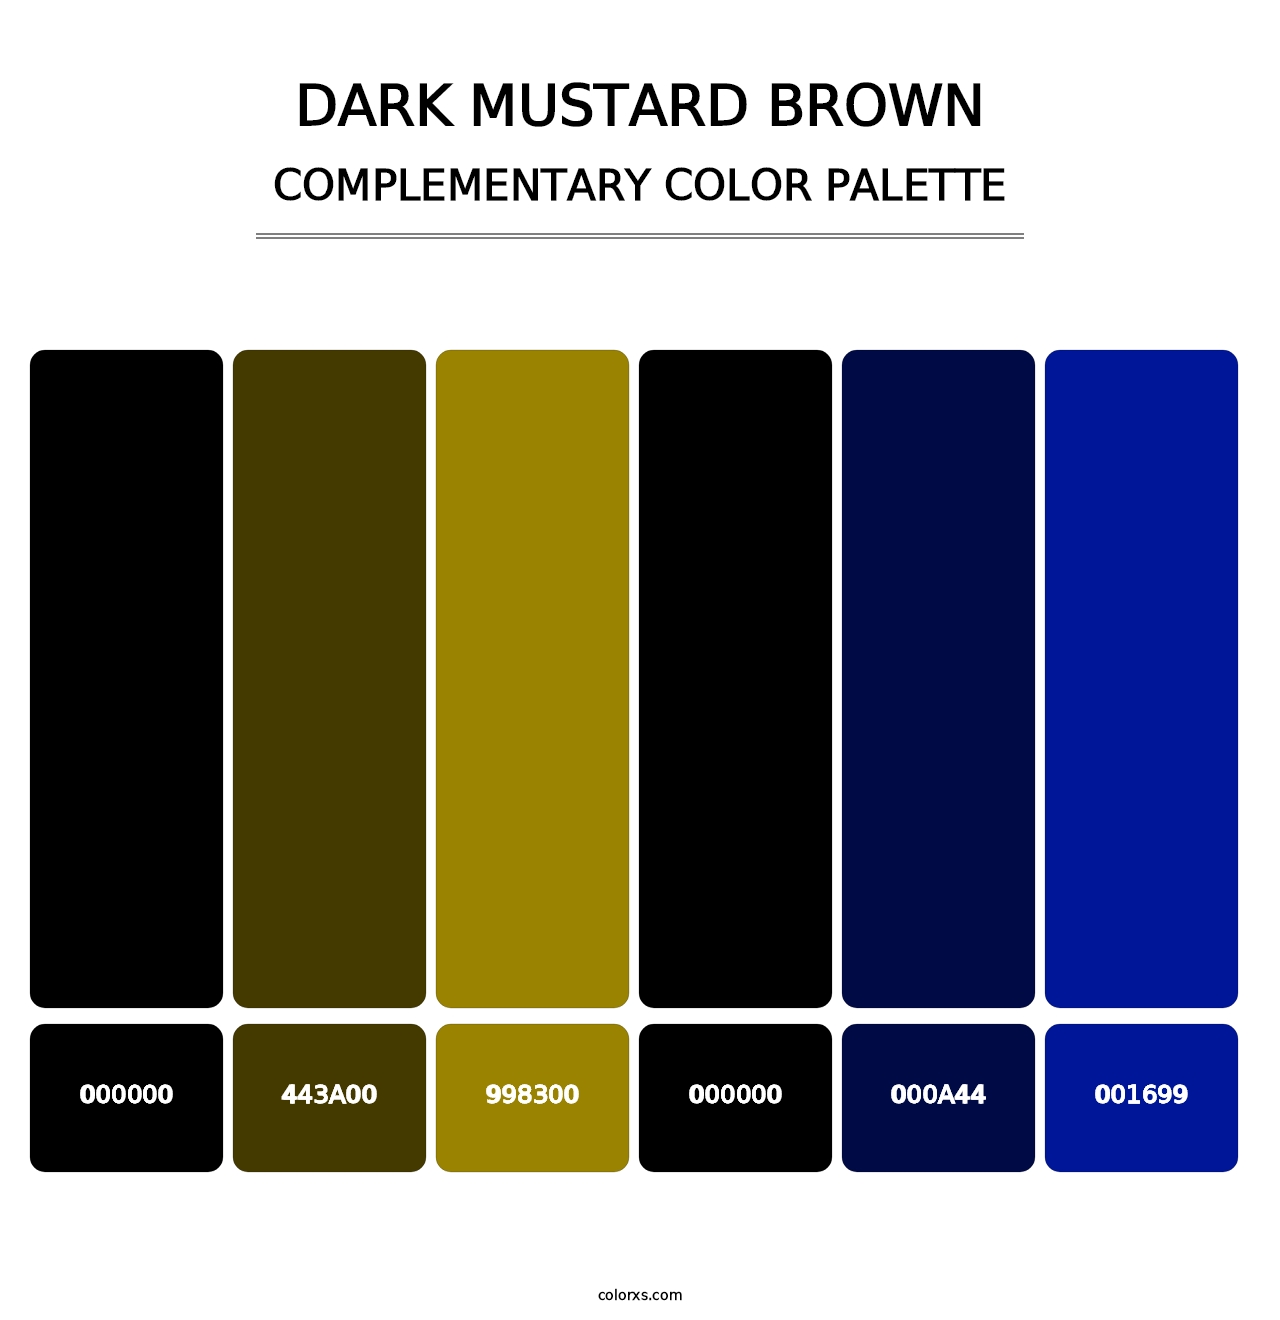 Dark Mustard Brown - Complementary Color Palette